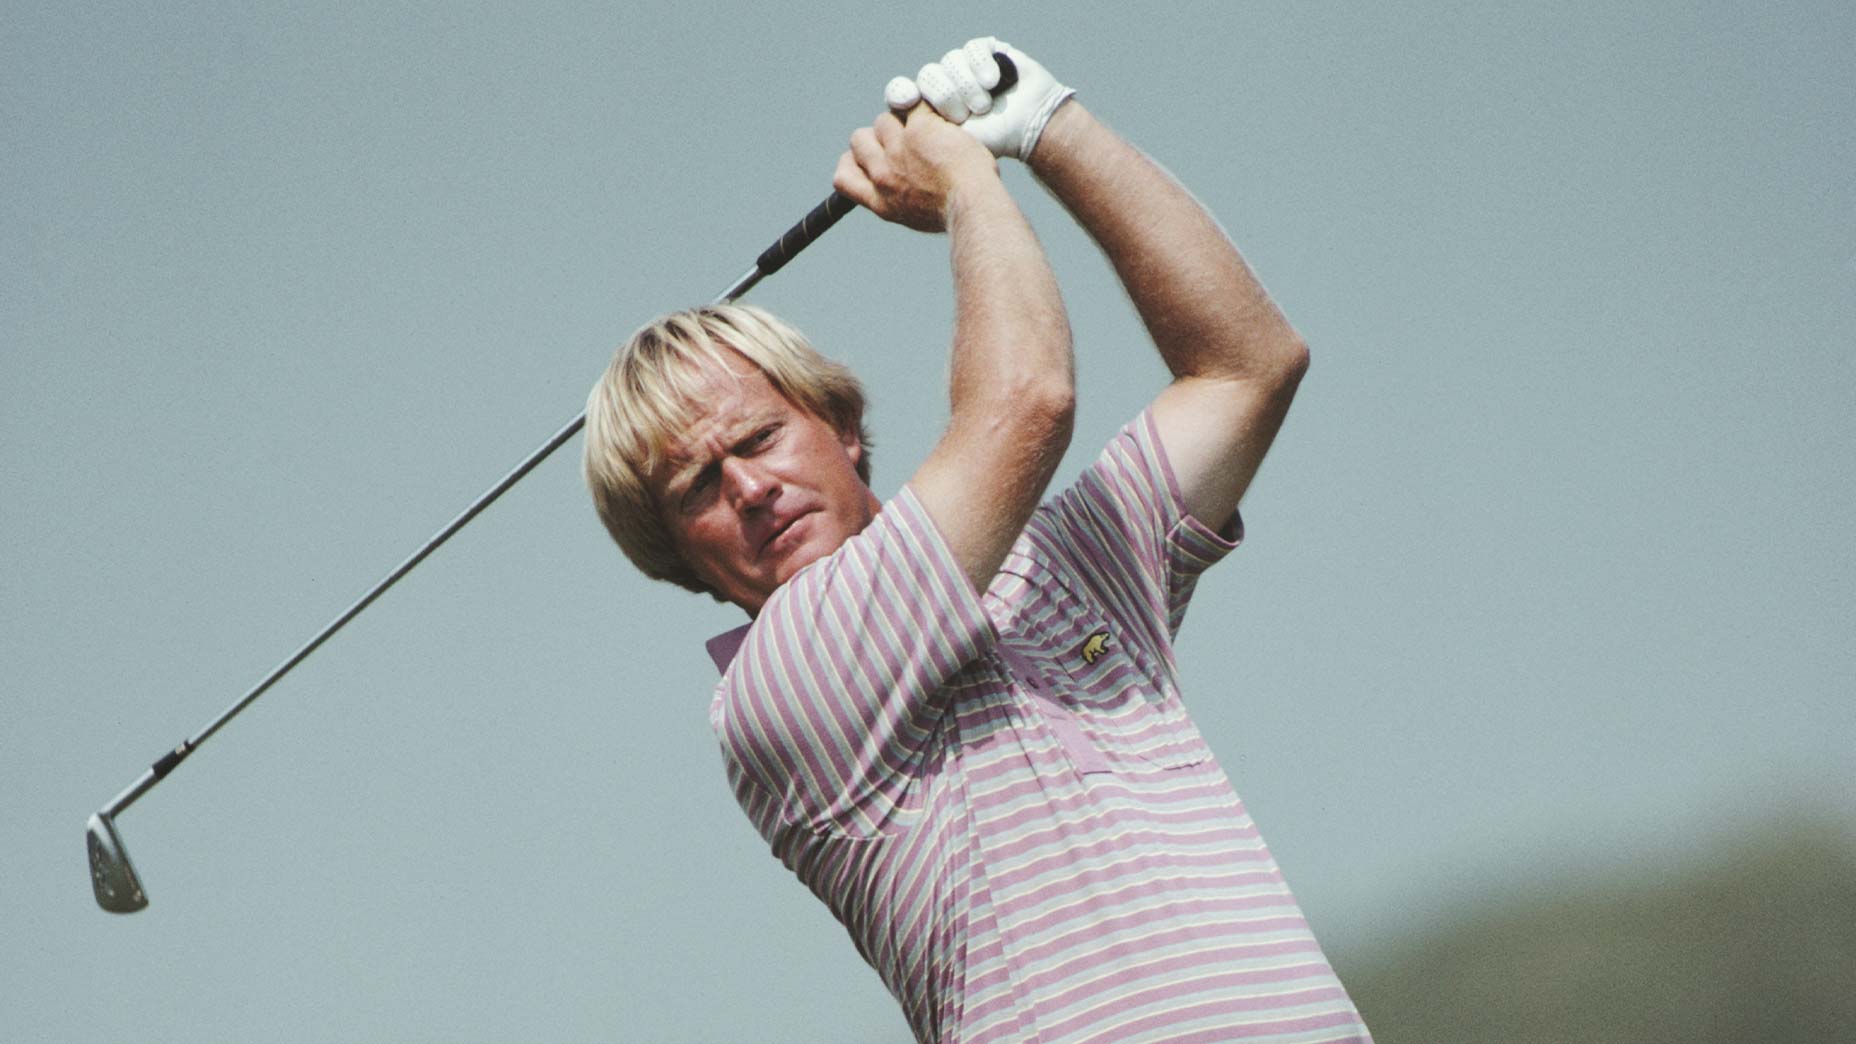 Jack Nicklaus reveals 2 lessons in preparation that propelled career